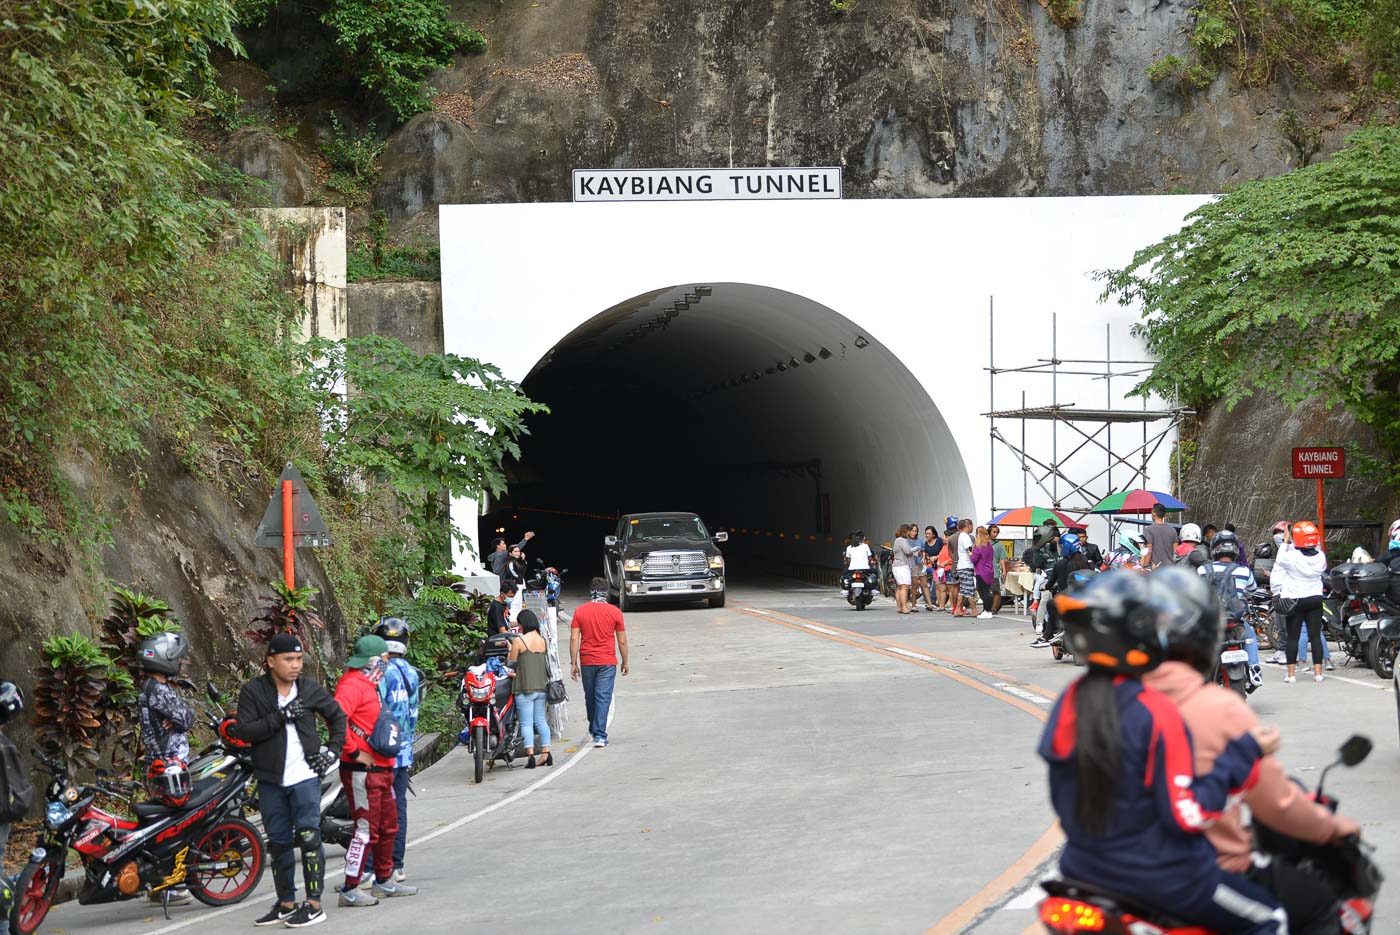 Tourists banned in Cavite’s Kaybiang Tunnel starting March 19